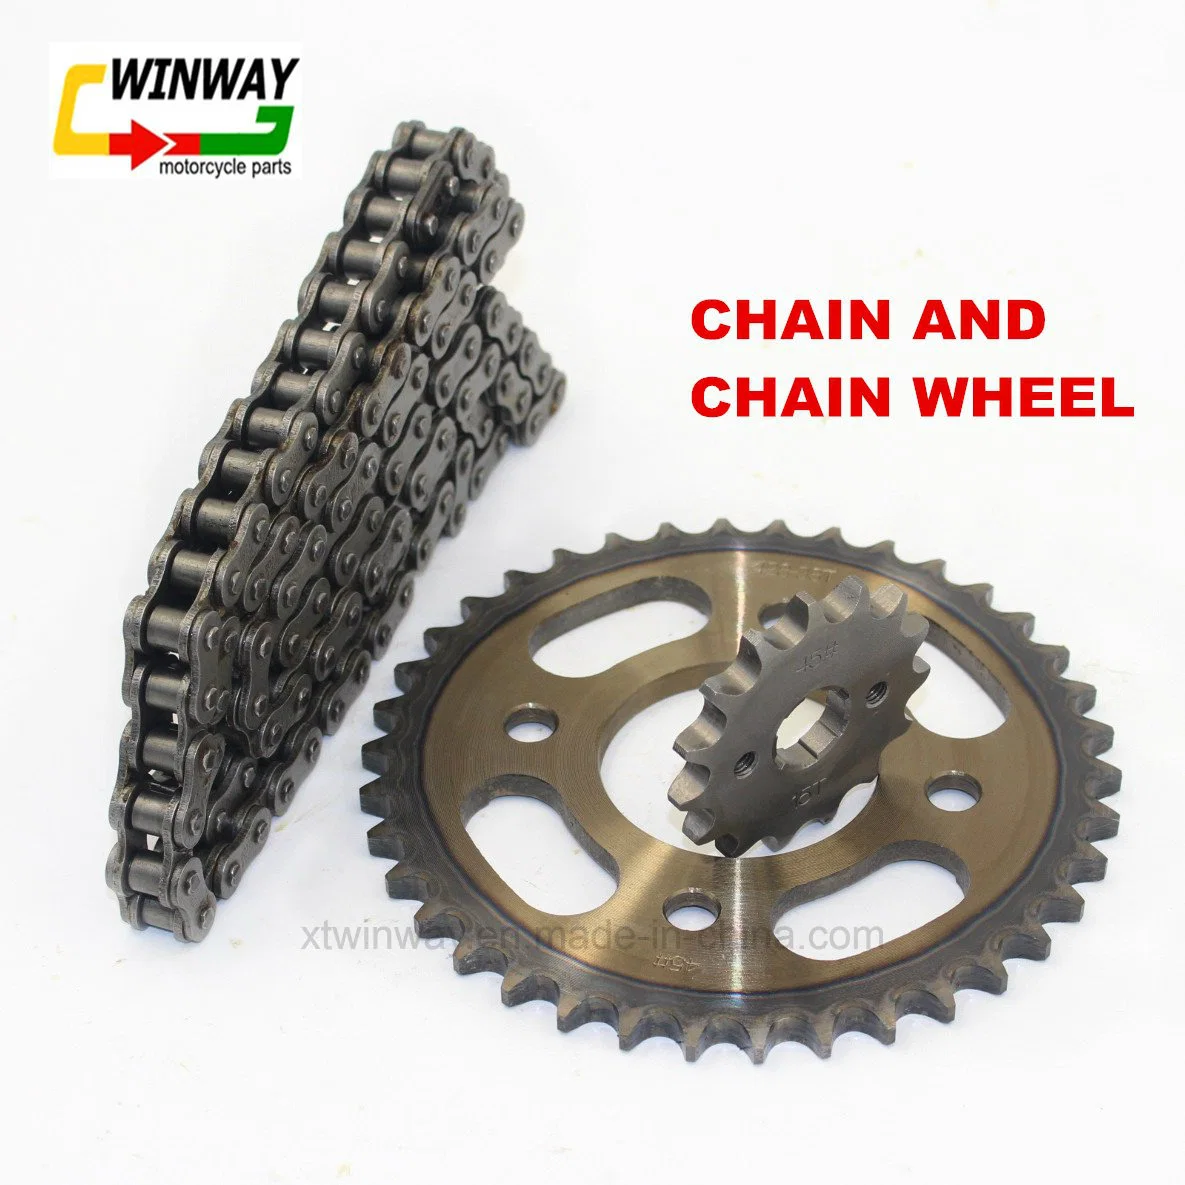 Cg125 428h Bush Chain Motorcycle Parts with Chain Wheels